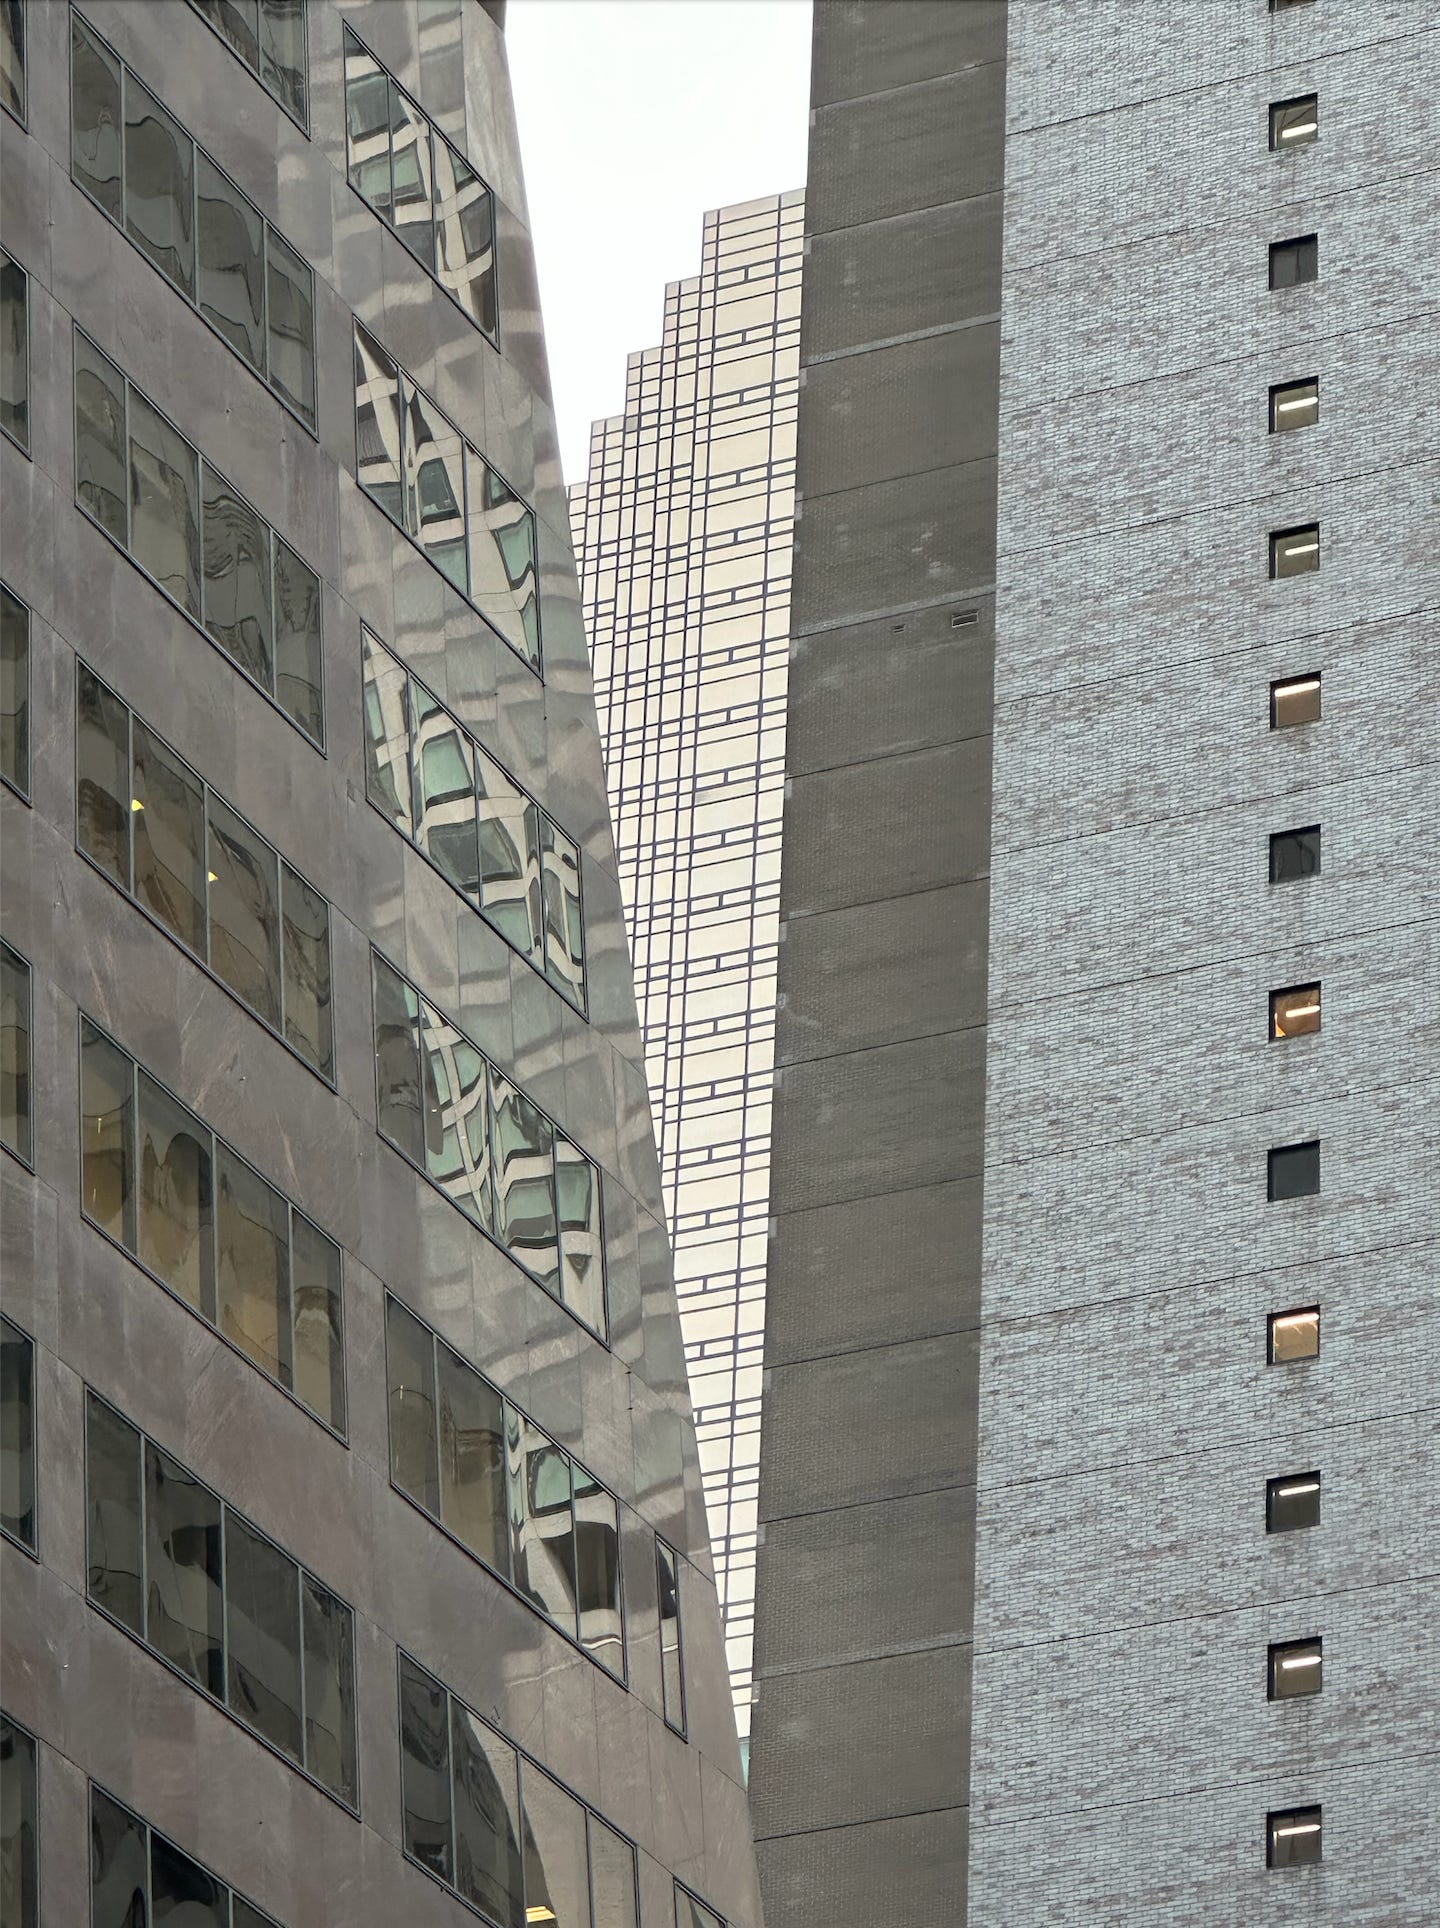 Reflective Manhattan skyscrapers viewed from Madison Ave near 53rd